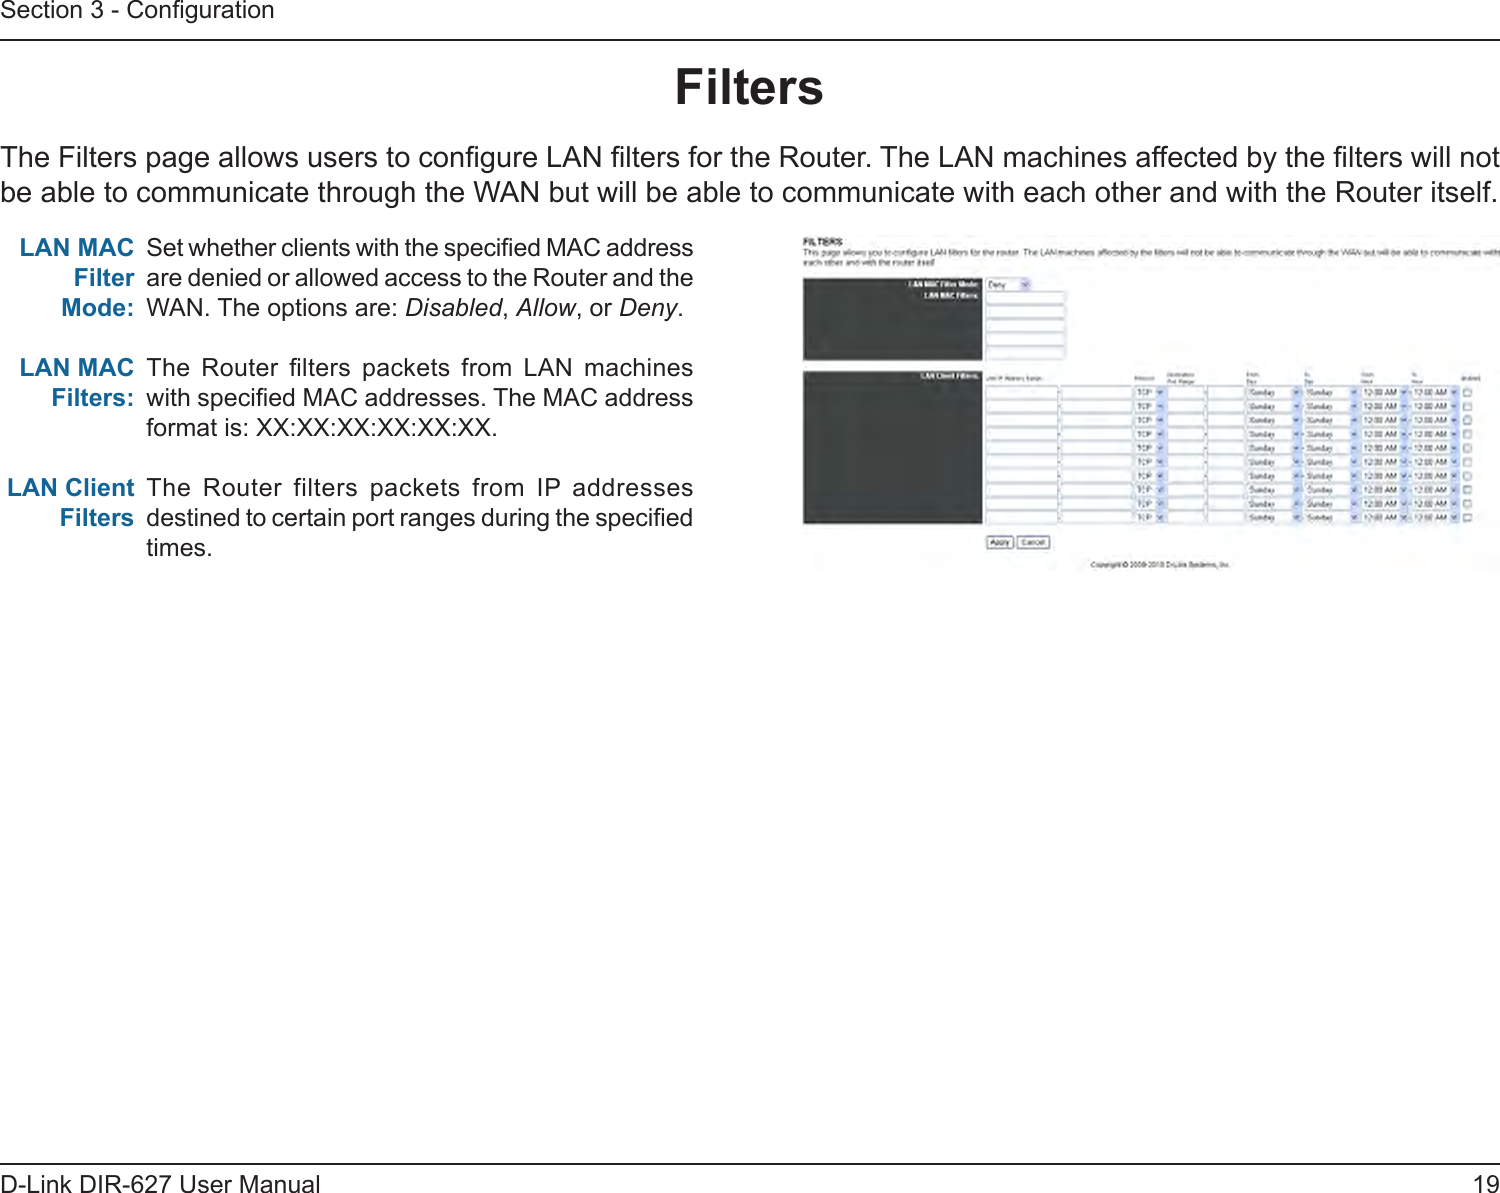 19D-Link DIR-627 User ManualSection 3 - CongurationFiltersThe Filters page allows users to congure LAN lters for the Router. The LAN machines affected by the lters will not be able to communicate through the WAN but will be able to communicate with each other and with the Router itself.Set whether clients with the specied MAC address are denied or allowed access to the Router and the WAN. The options are: Disabled, Allow, or Deny.The  Router  lters  packets  from  LAN  machines with specied MAC addresses. The MAC address format is: XX:XX:XX:XX:XX:XX.The  Router  filters  packets  from  IP  addresses destined to certain port ranges during the specied times.LANMACFilterMode:LANMACFilters:LANClientFilters 